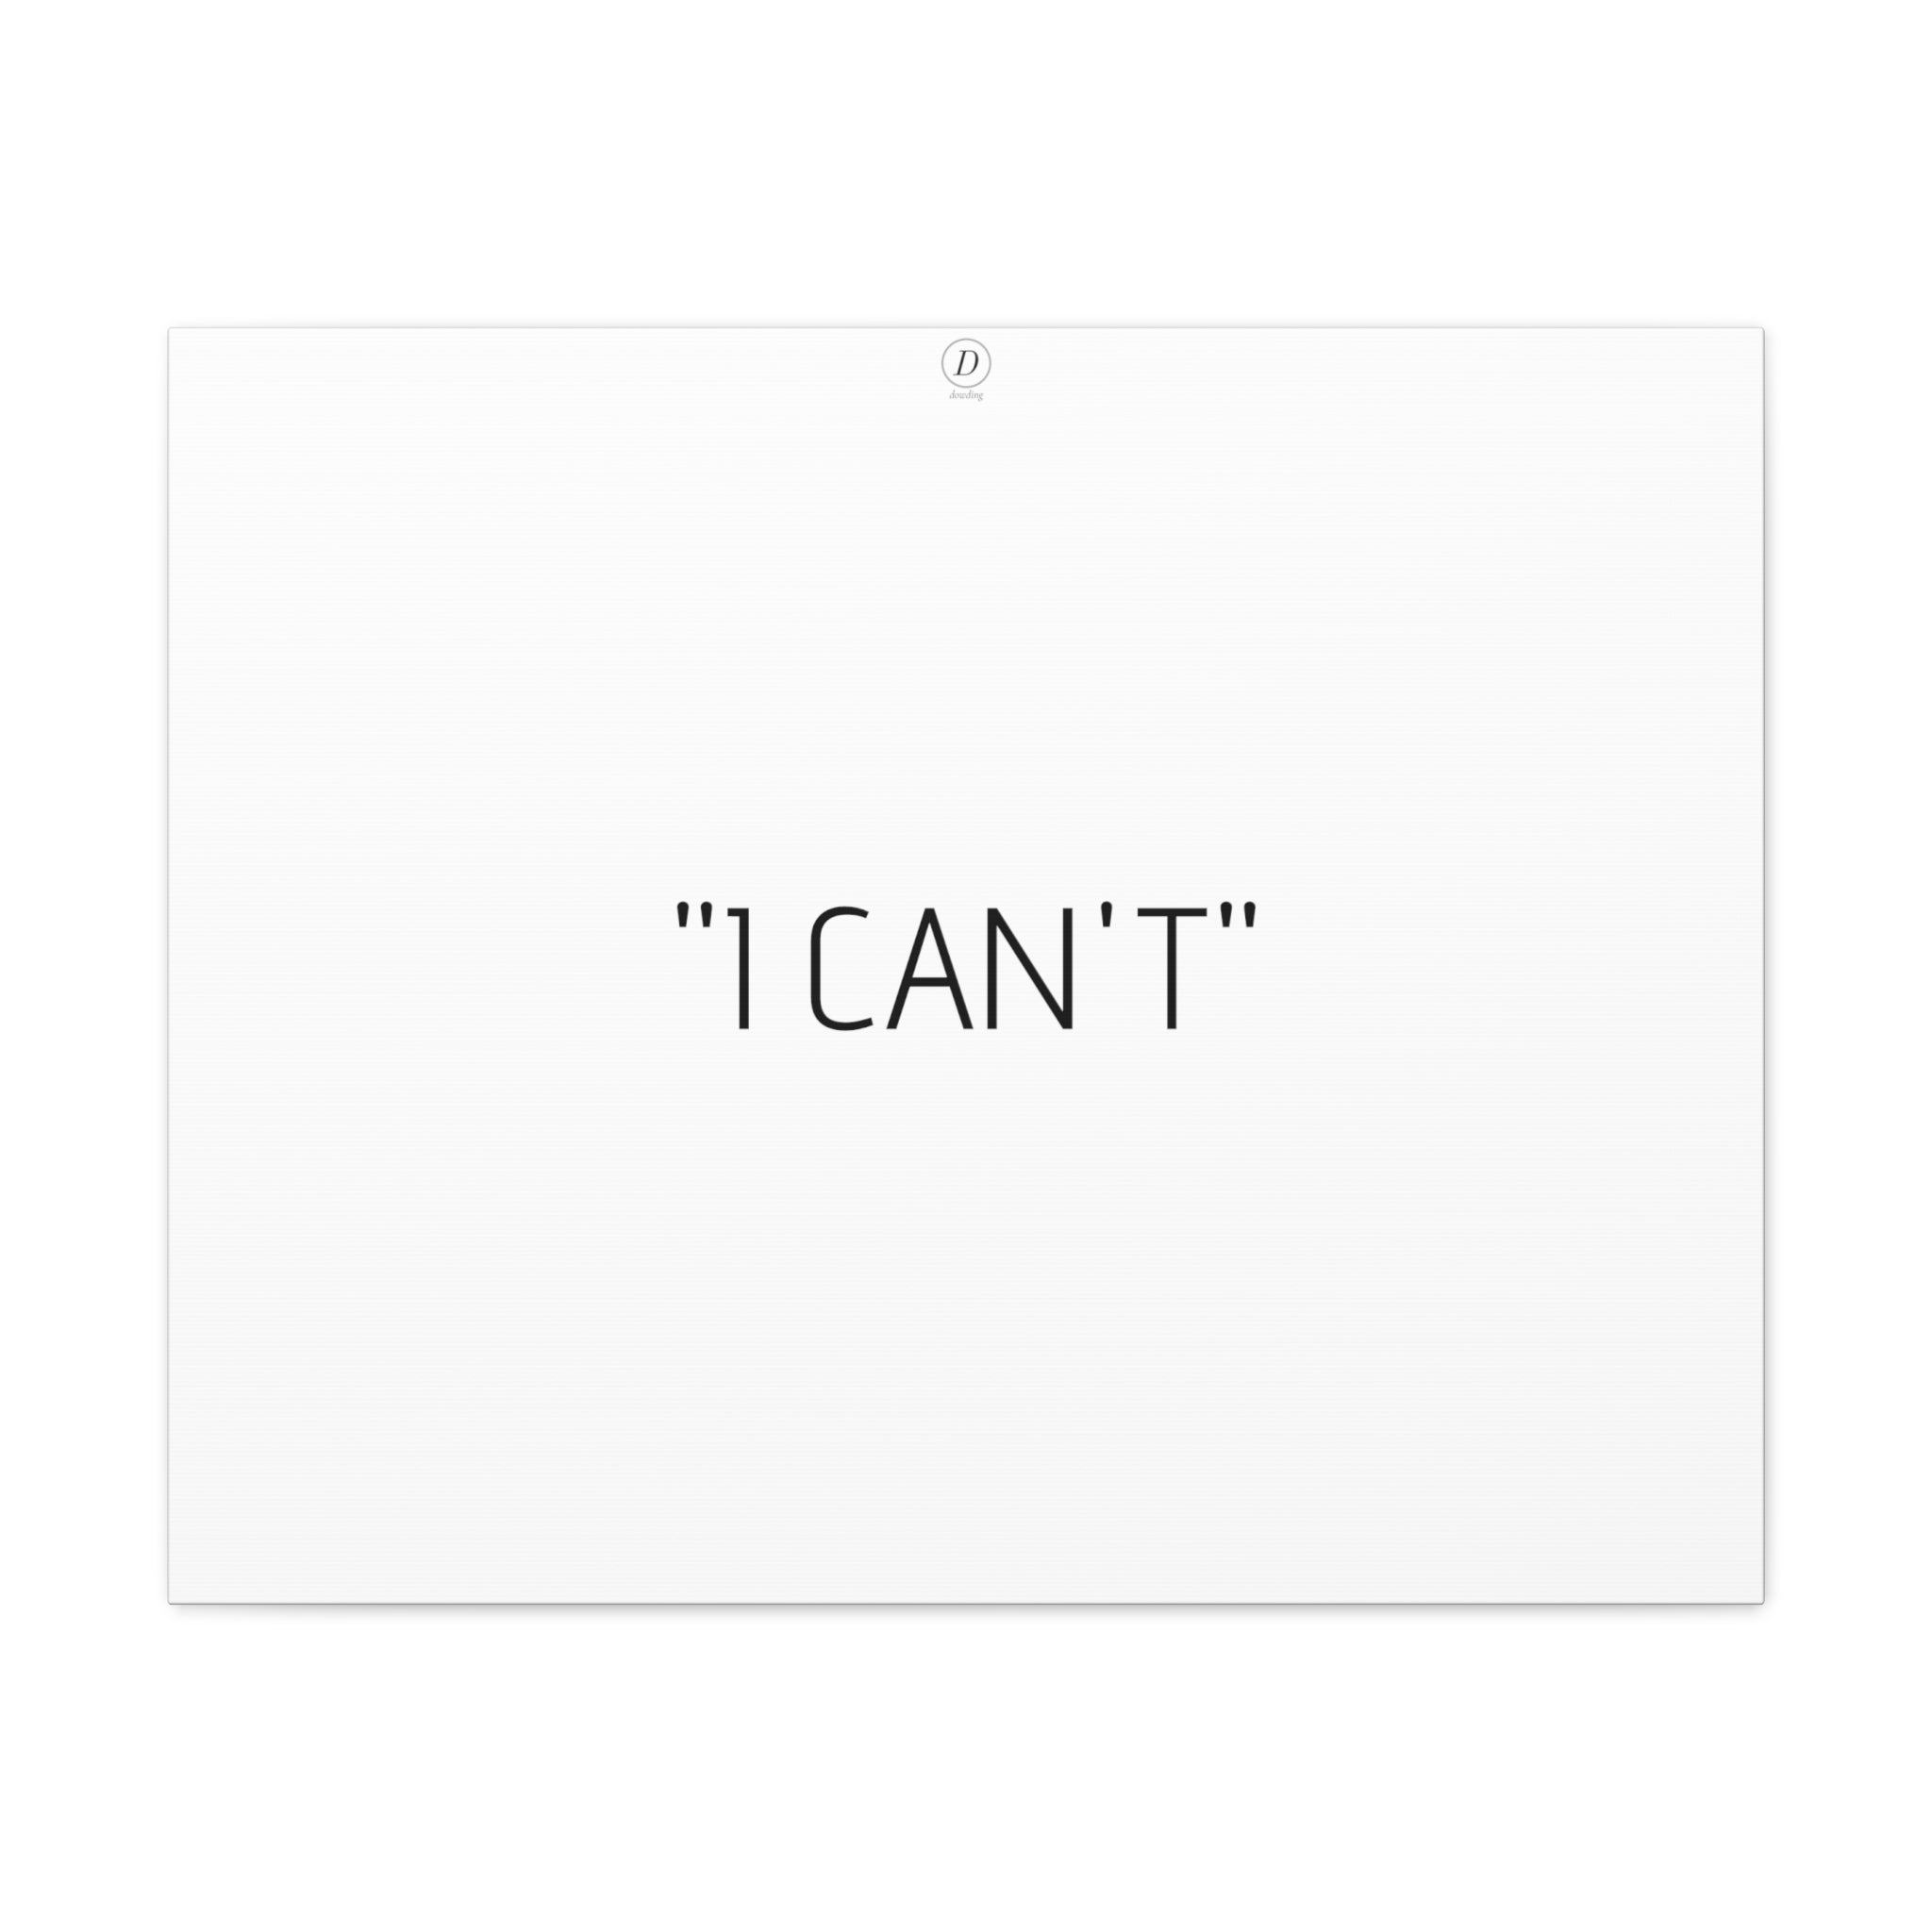 "I CAN'T" Motivational Canvas Gallery Wraps